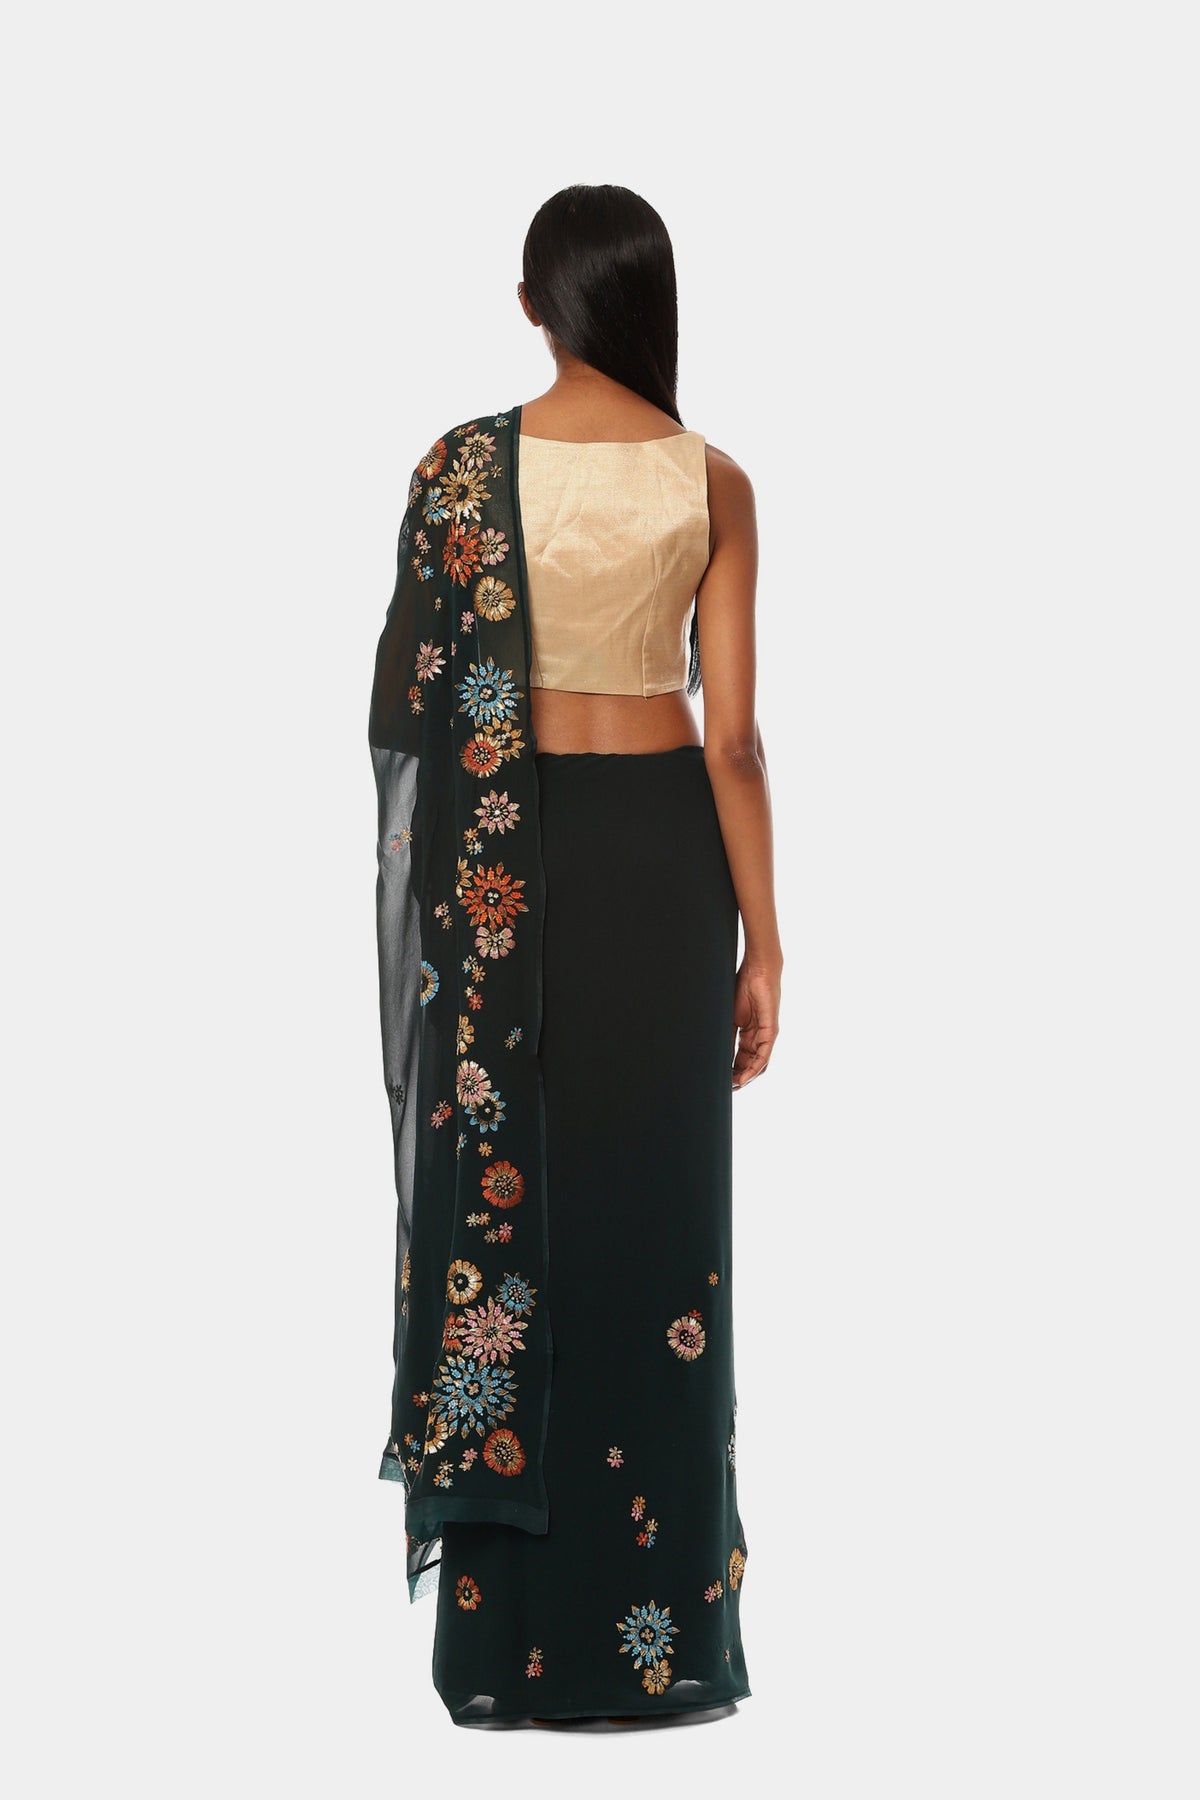 The Embroidered Jungle Queen Saree